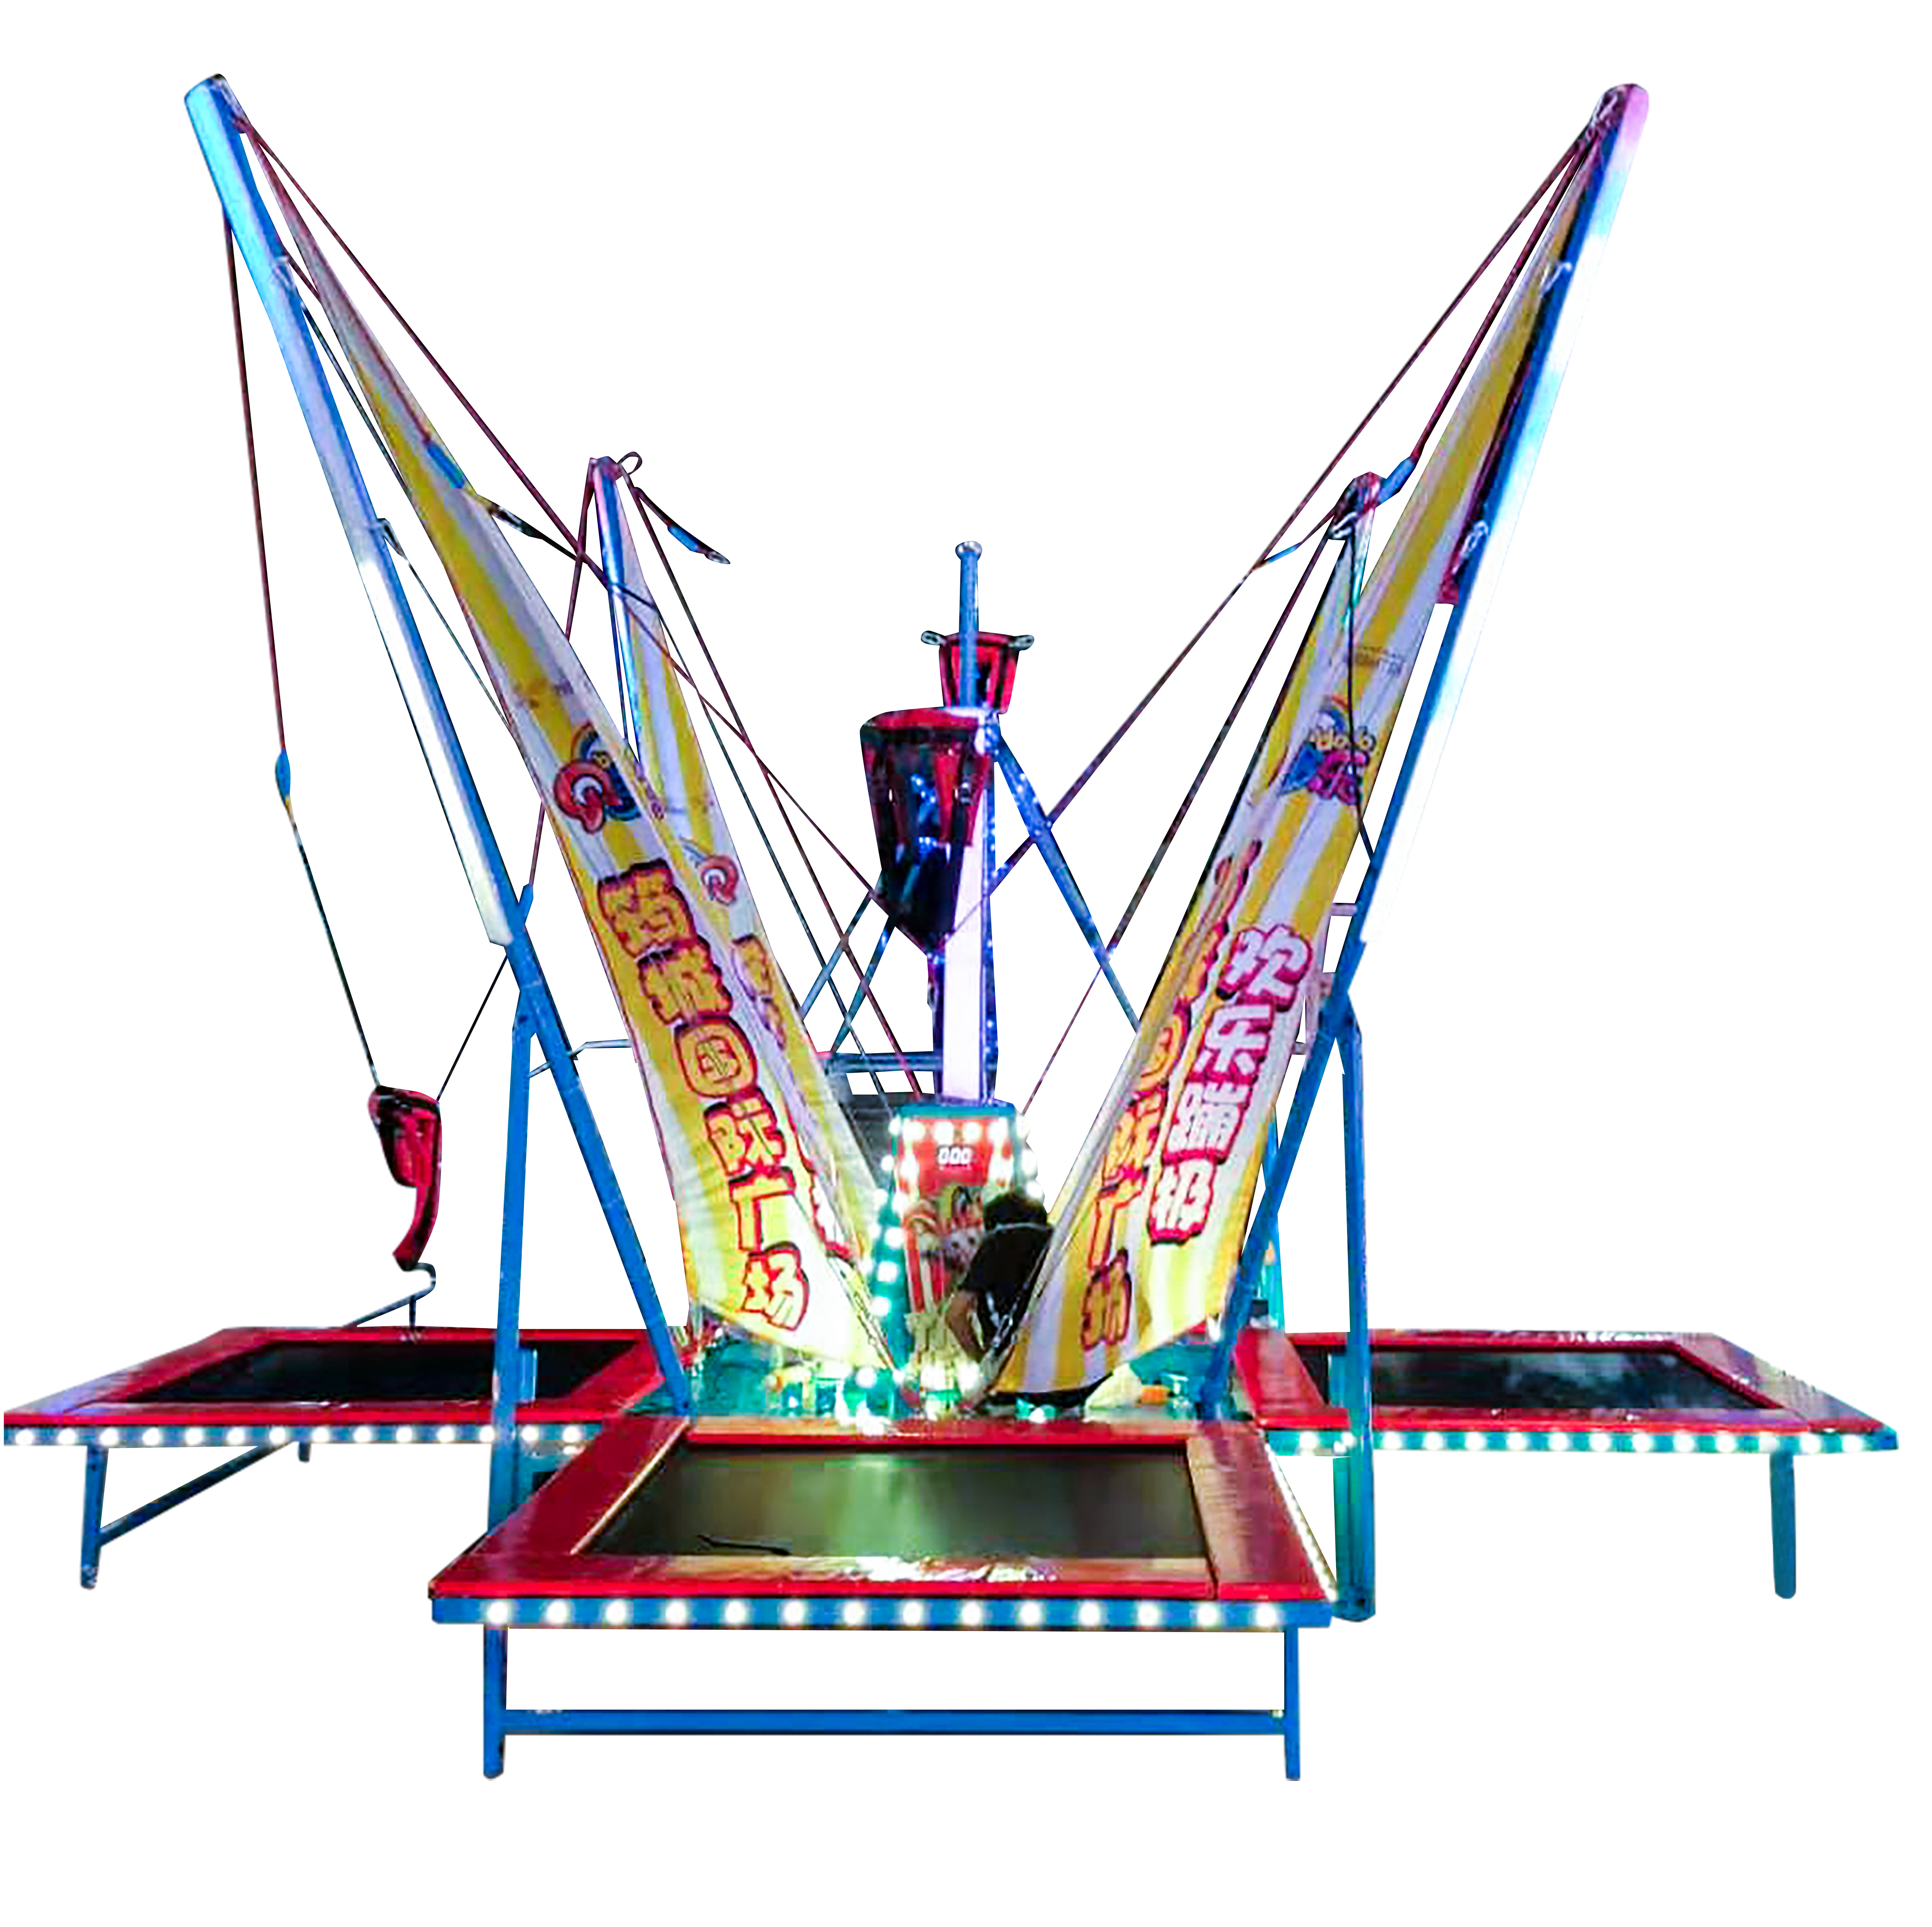 Most Popular 4 Bed Mobile Bungee Trampoline For Sale|Amusment Park Carnival Fair Rides For Sale